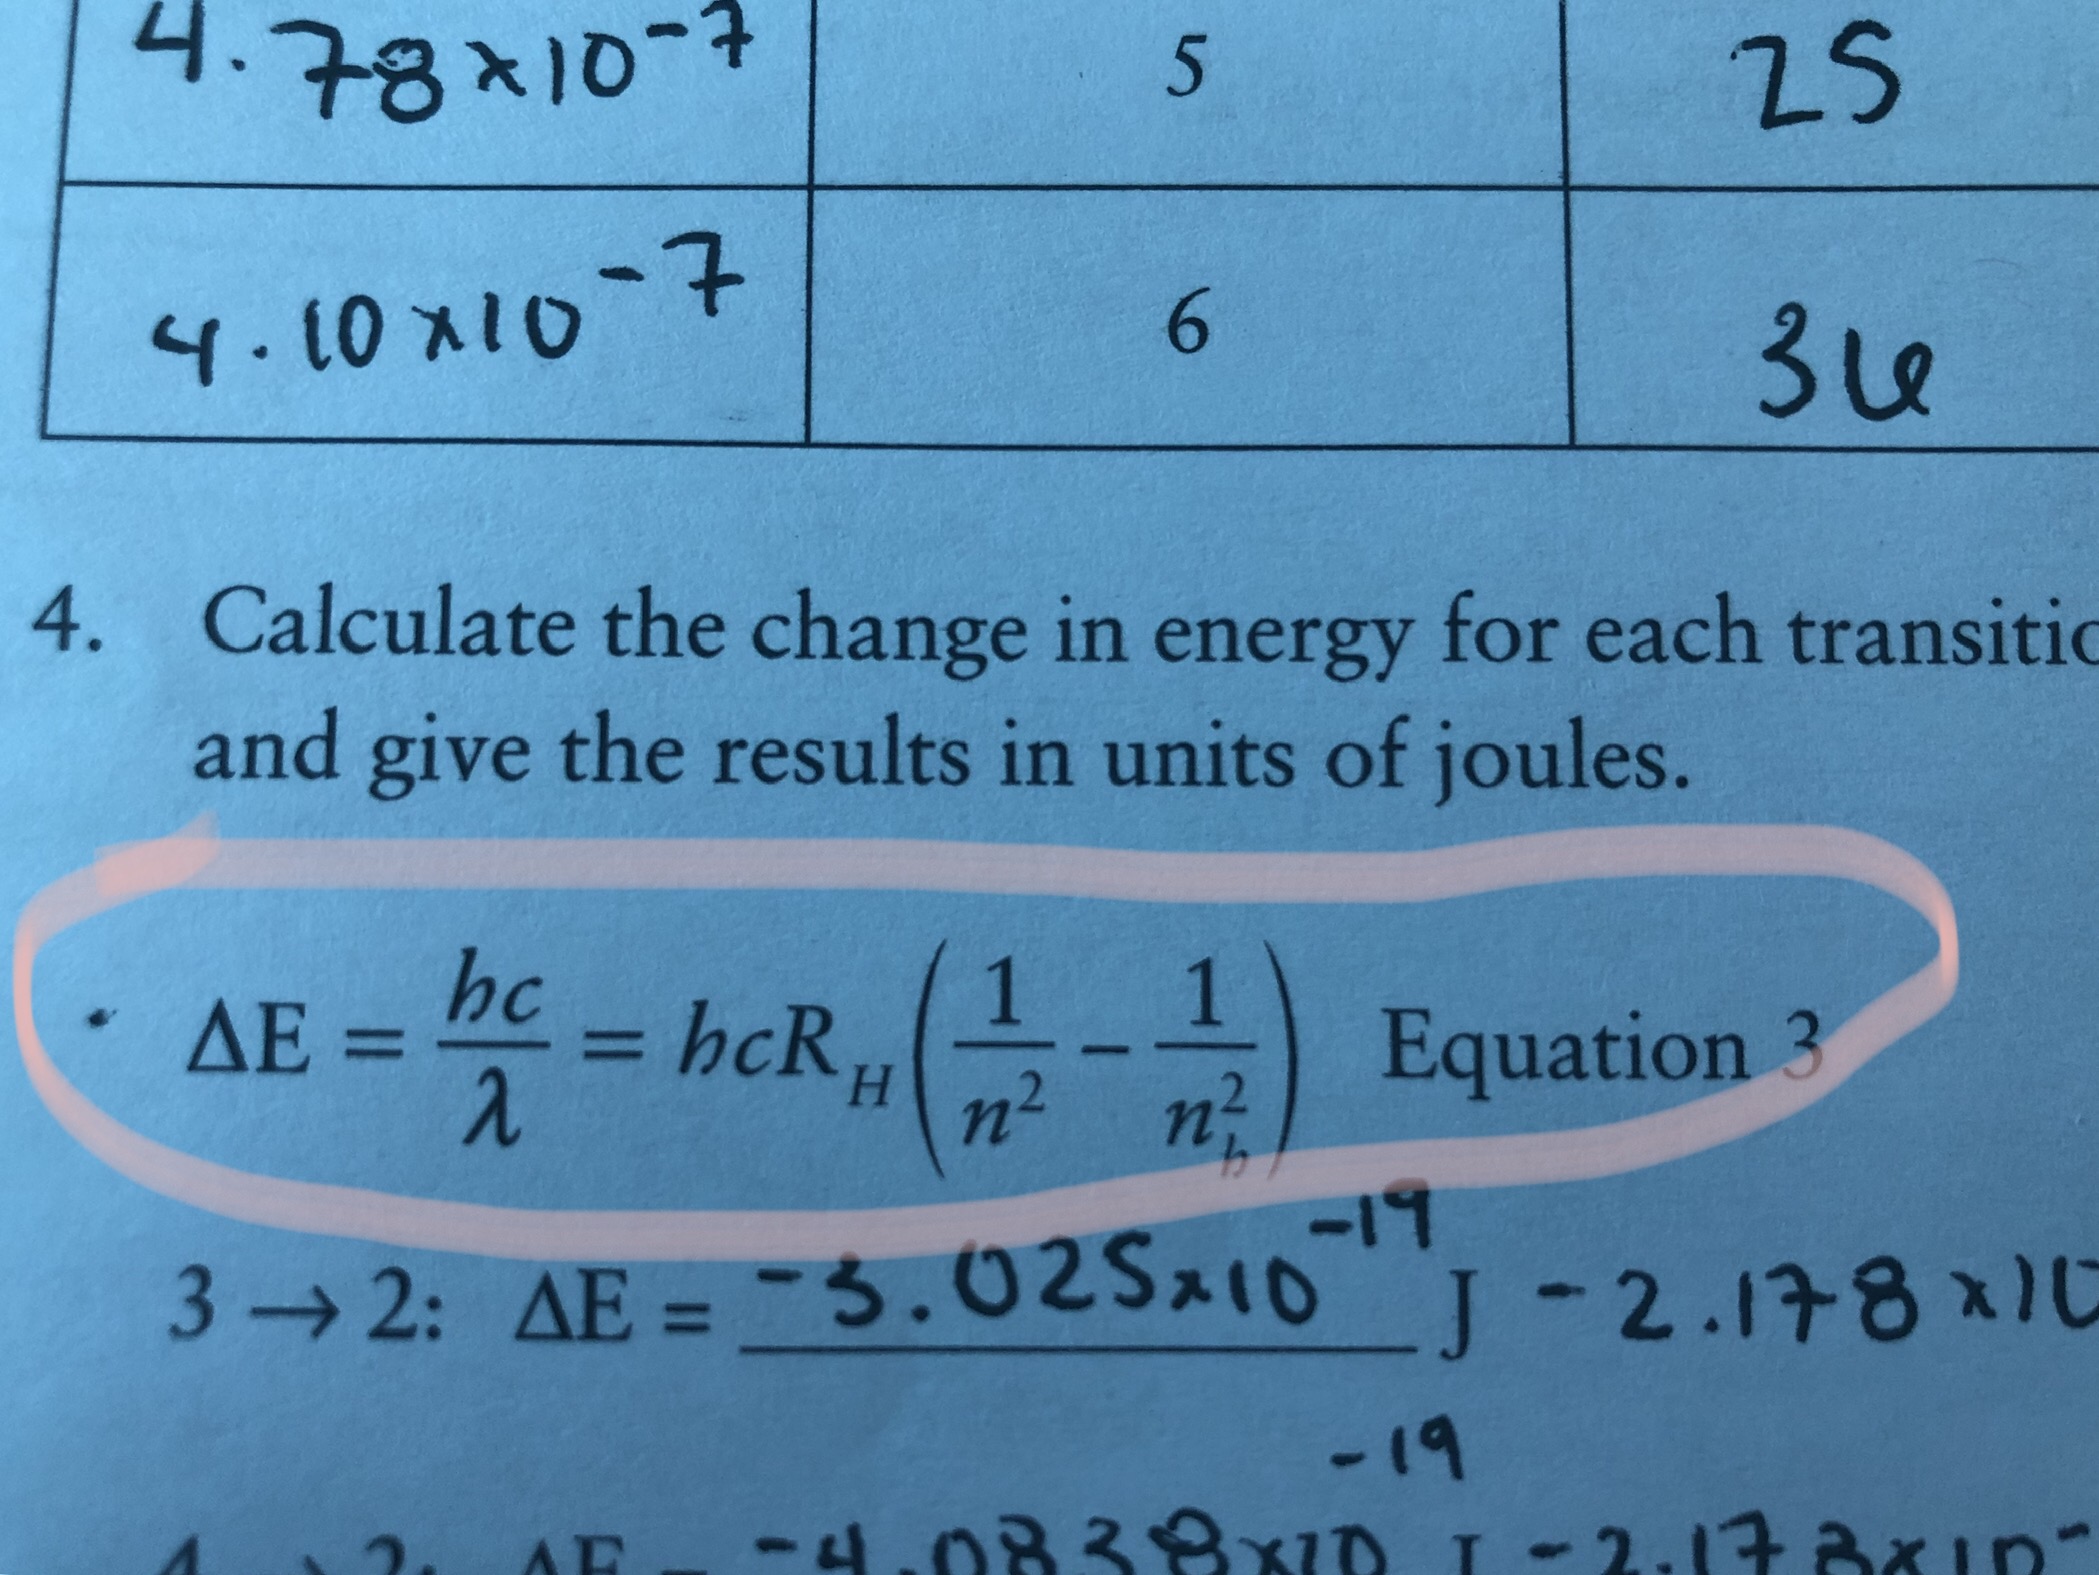 4.78x10-7
25
6.
3e
4.10x10-7
Calculate the change in energy for each transitic
and give the results in units of joules.
4.
hc
AE =
= hcR,-) Equation
%3D
H.
n²
-19
3 2: AE = -3.02Sx10
J-2.178x1
%3D
-19
<-4.0838XID 1-2.17axIp-
-2.173*ID
